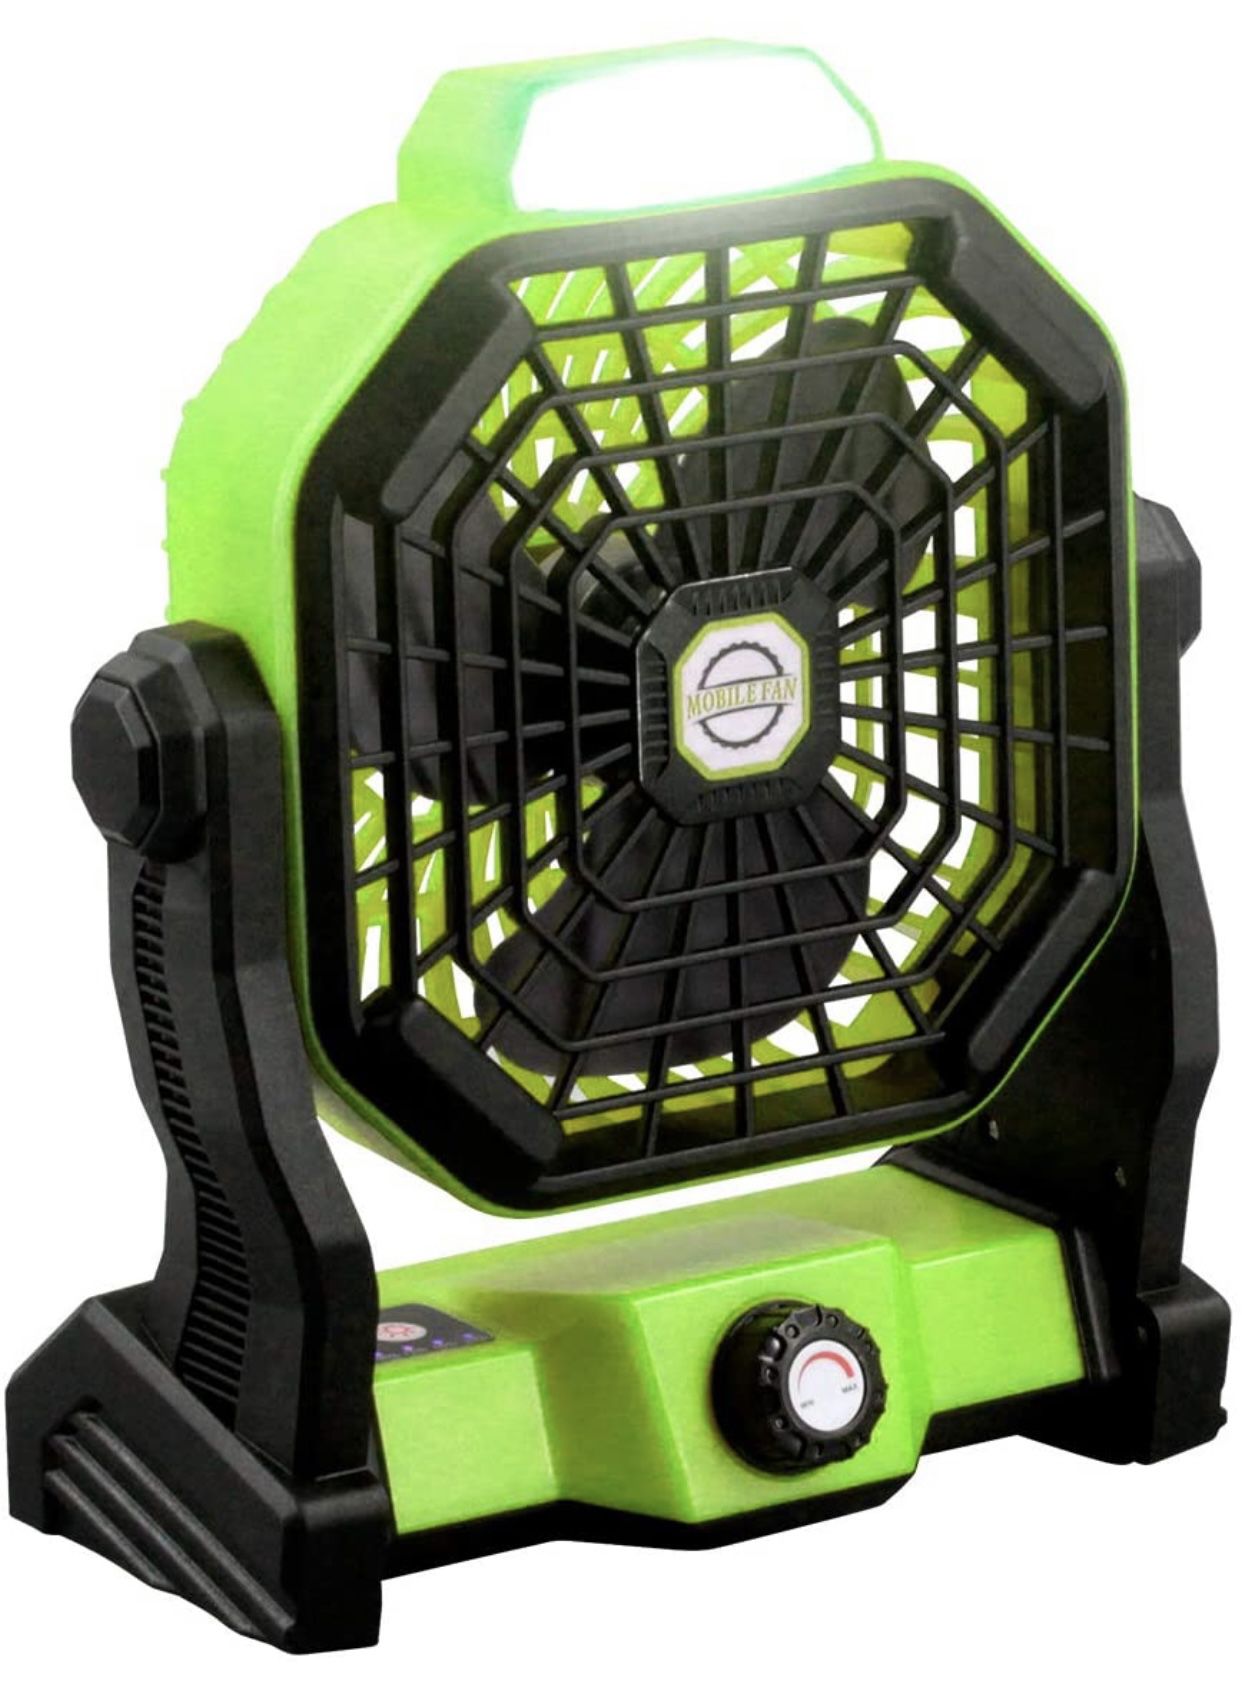 Battery Powered Fan with LED Lantern,7800mAh Portable Camping Fan Rechargeable,Up to 25 hours